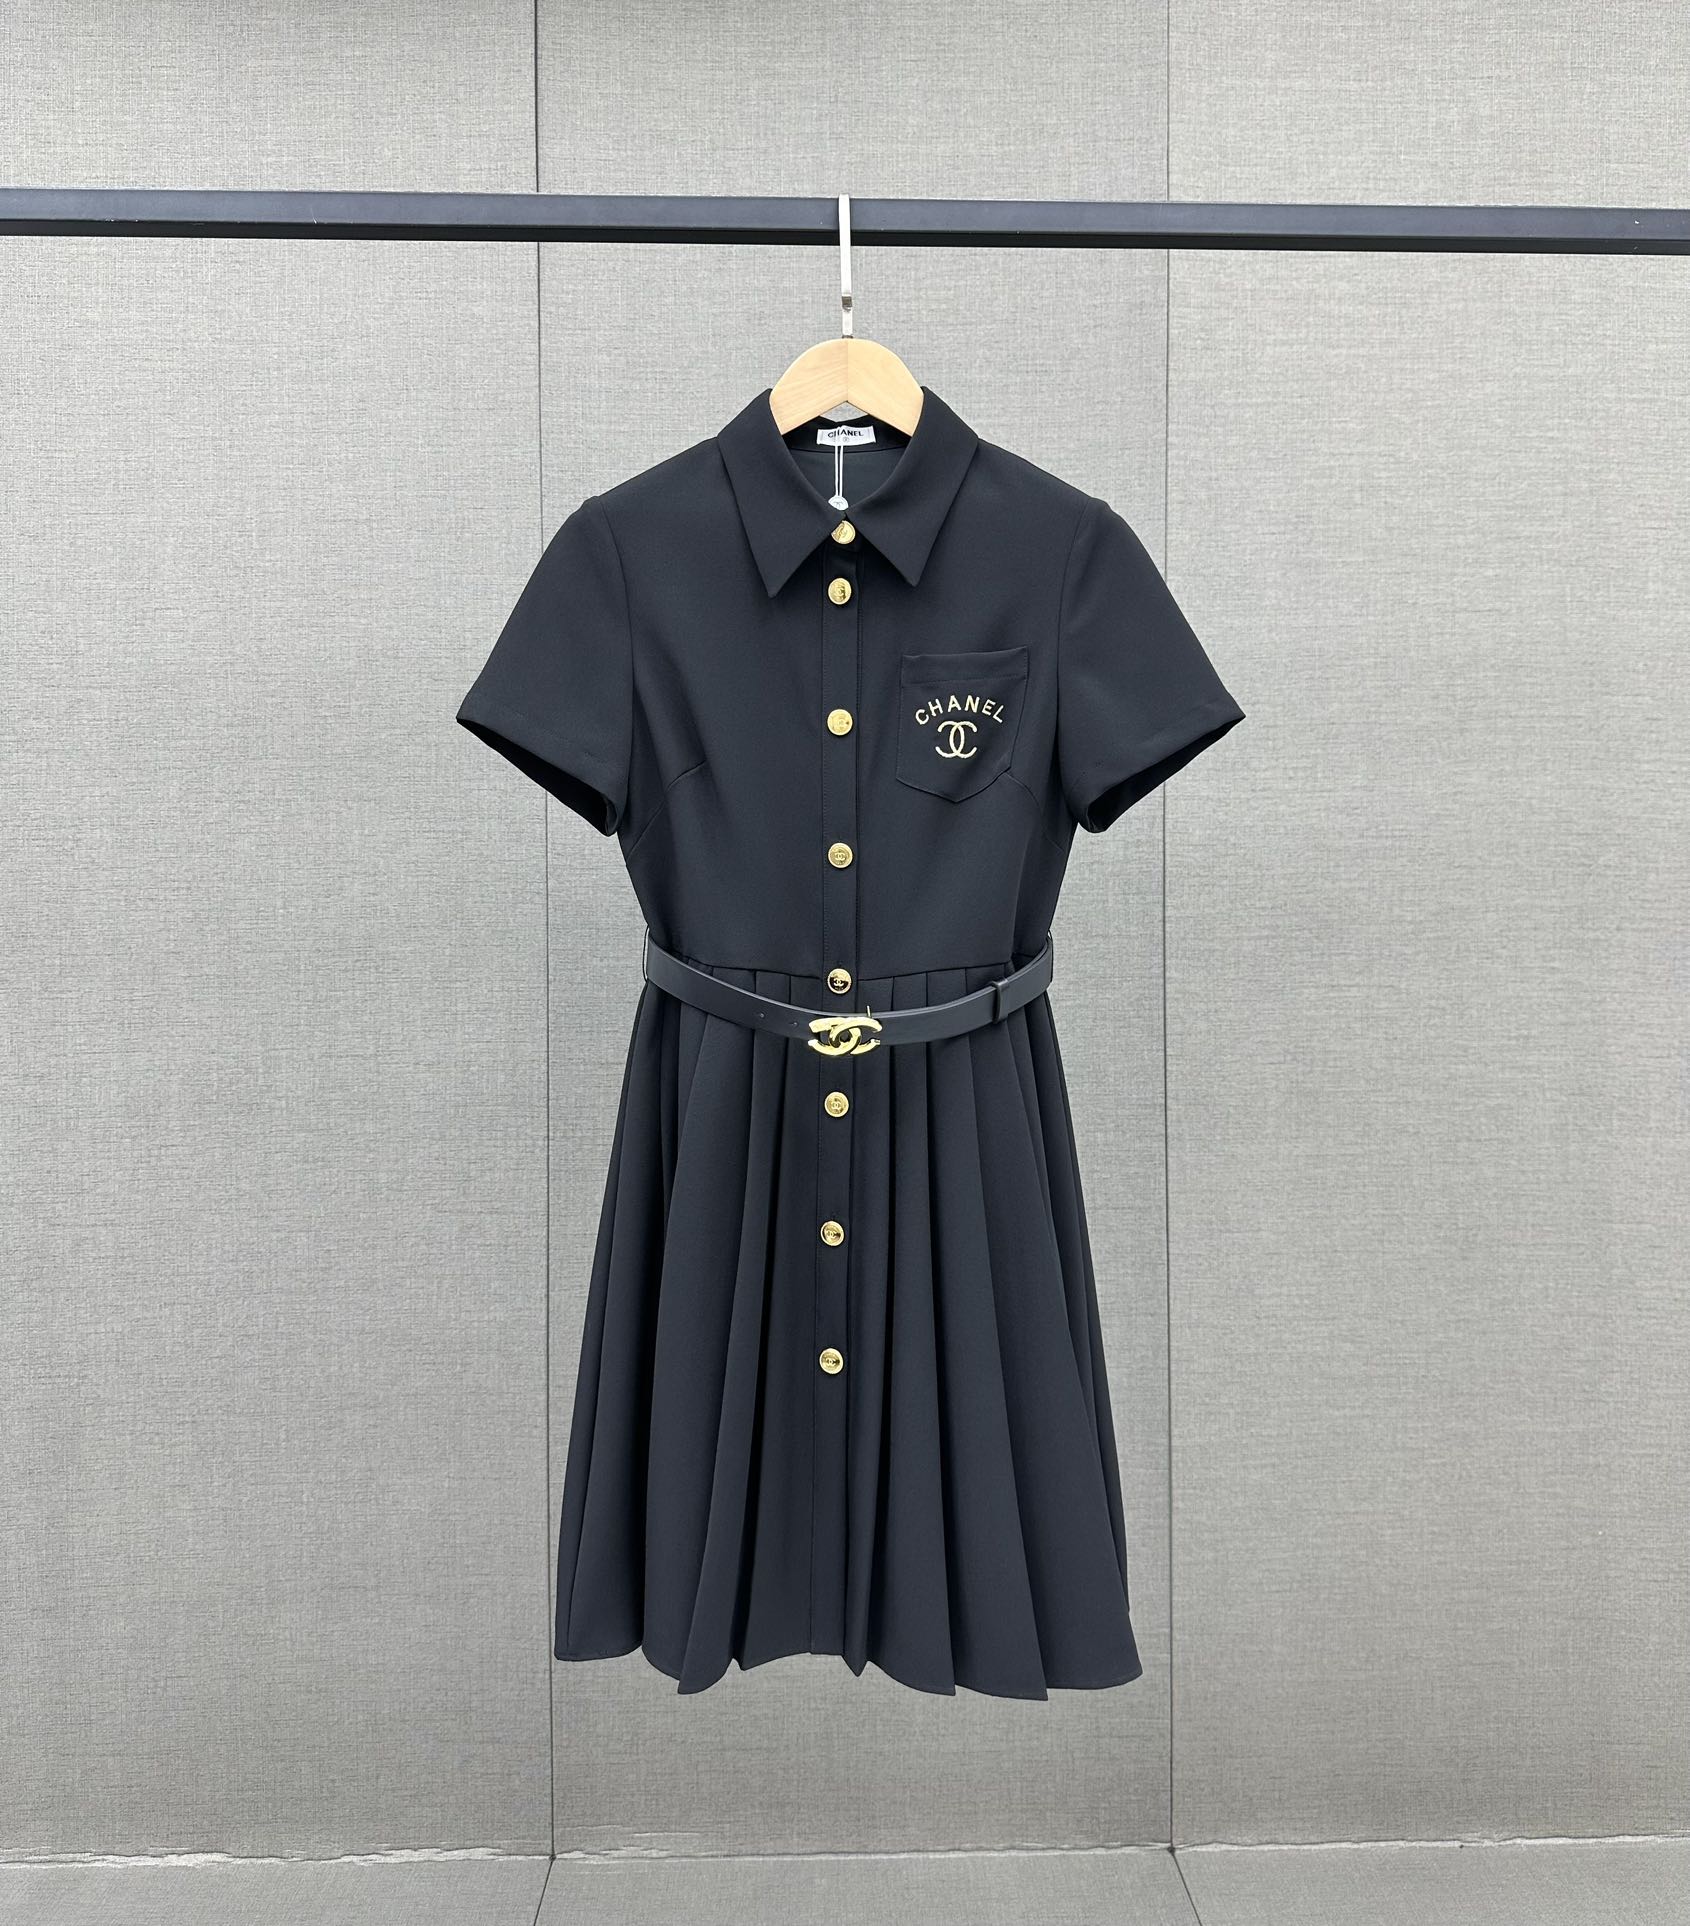 Chanel Clothing Dresses T-Shirt Embroidery Short Sleeve